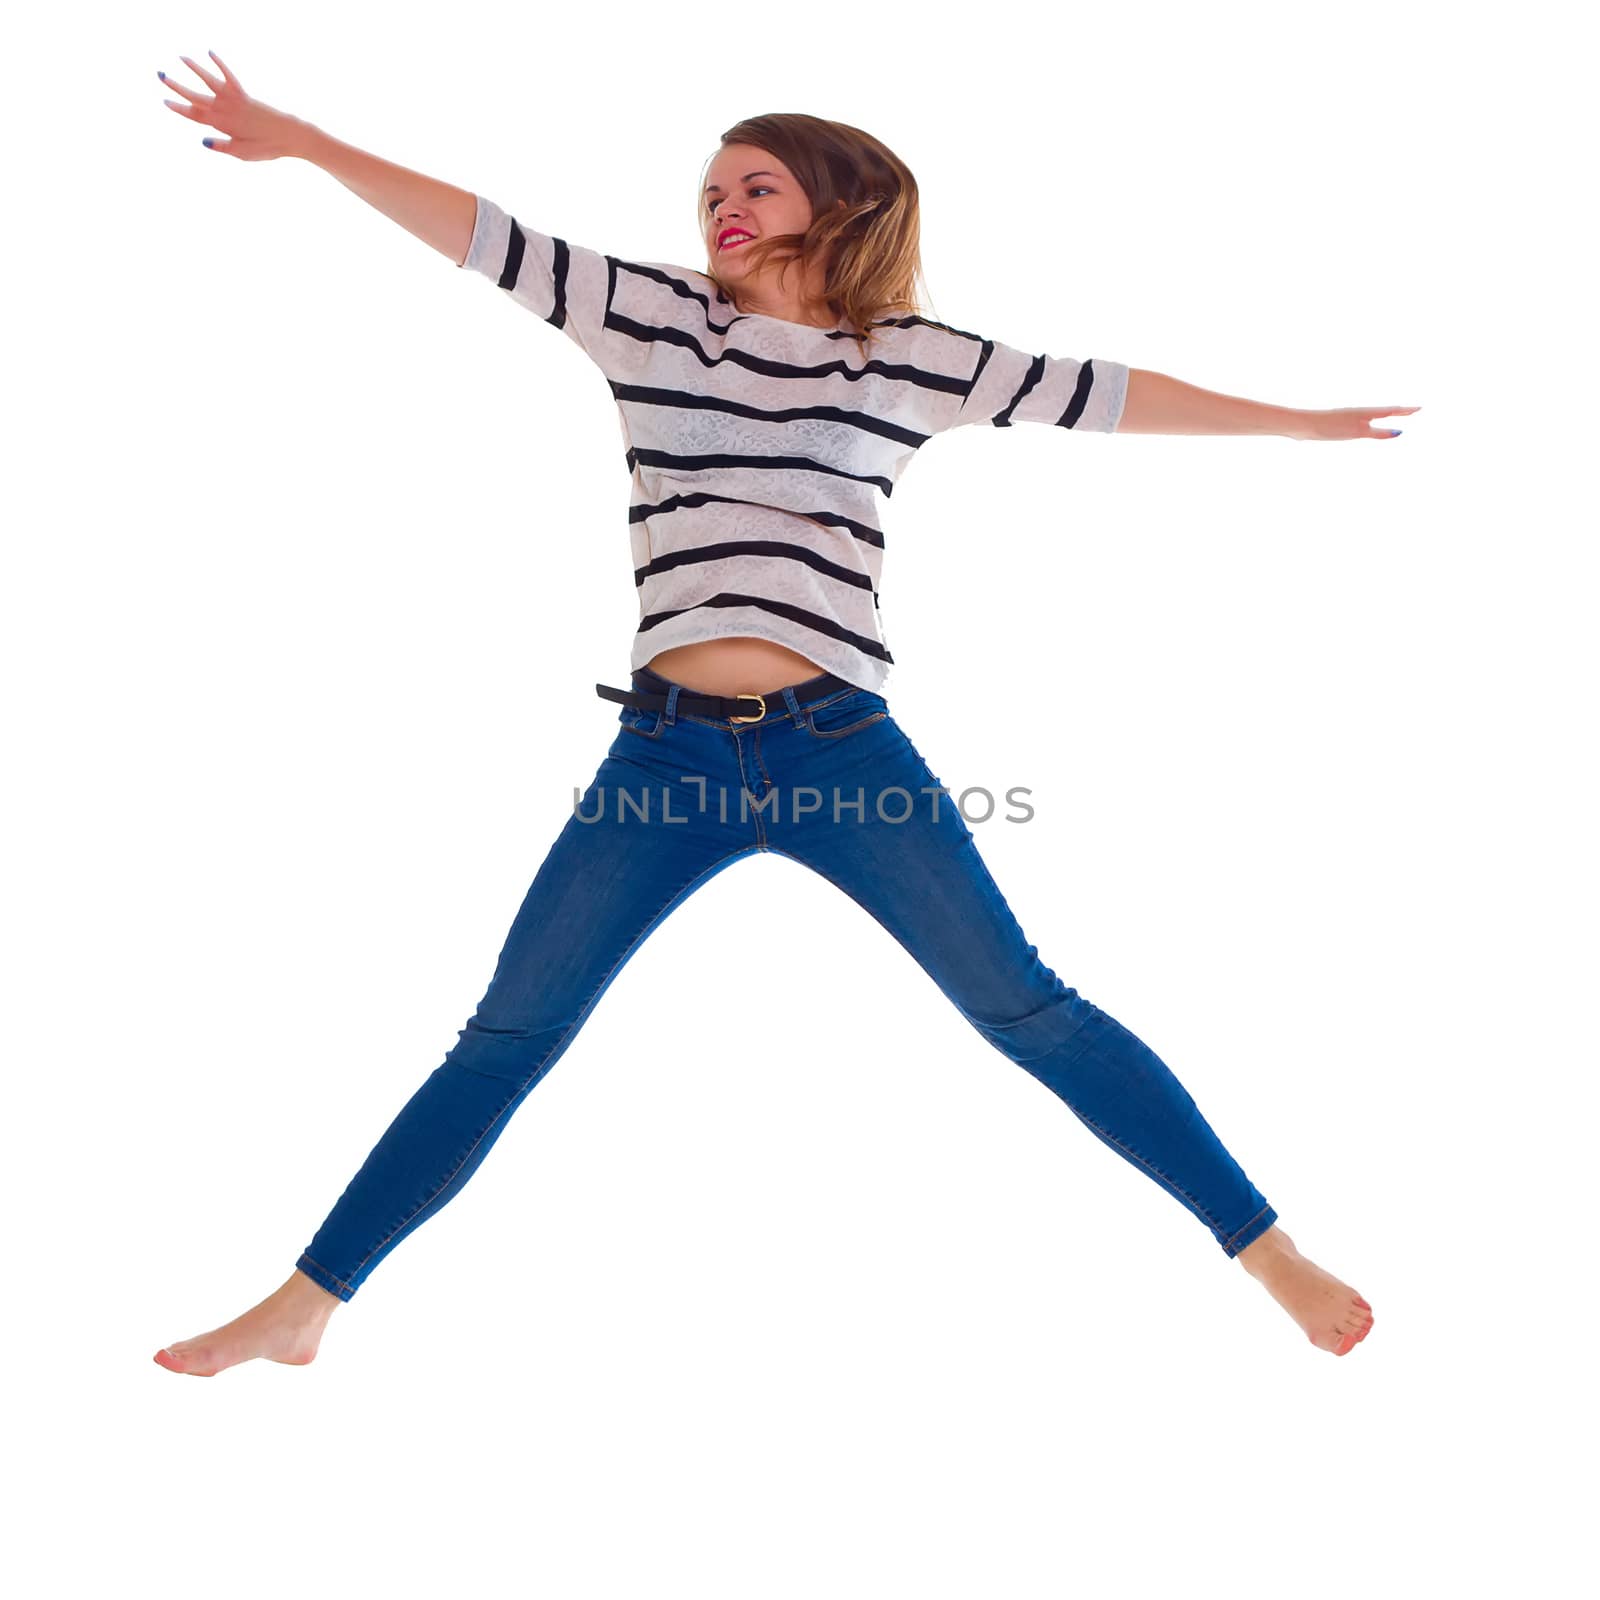 young woman in jeans jumping by victosha